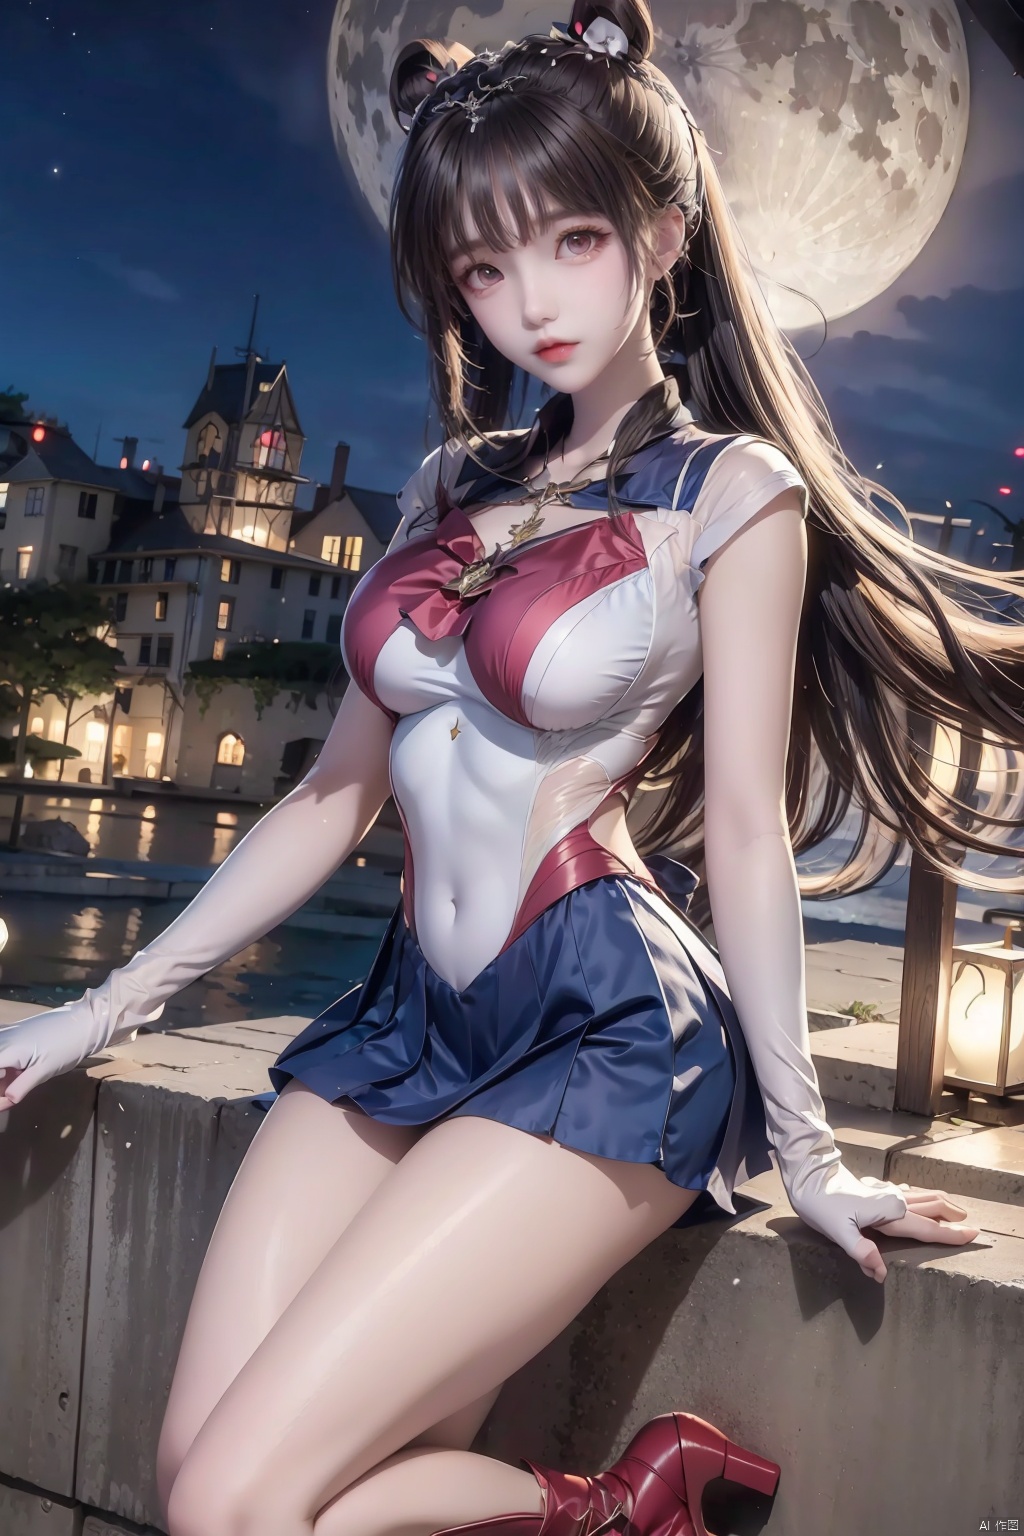  Top Quality, 1 girl, Sailor Moon, blonde hair, blue collar, boots, bow, castle, collar, city, crescent, Crescent, bun, earring, gloves, facial markings, flowers, full moon, gloves, jewelry, boots, layered skirt, lilies, lipstick, long hair, magic girl, cosmetics, Moon, night, Sailor Collar, Sailor Moon, sailor uniform, skirt, sky, solo, Star, Sky, Moon, pigtail, white shoes, white gloves, close up